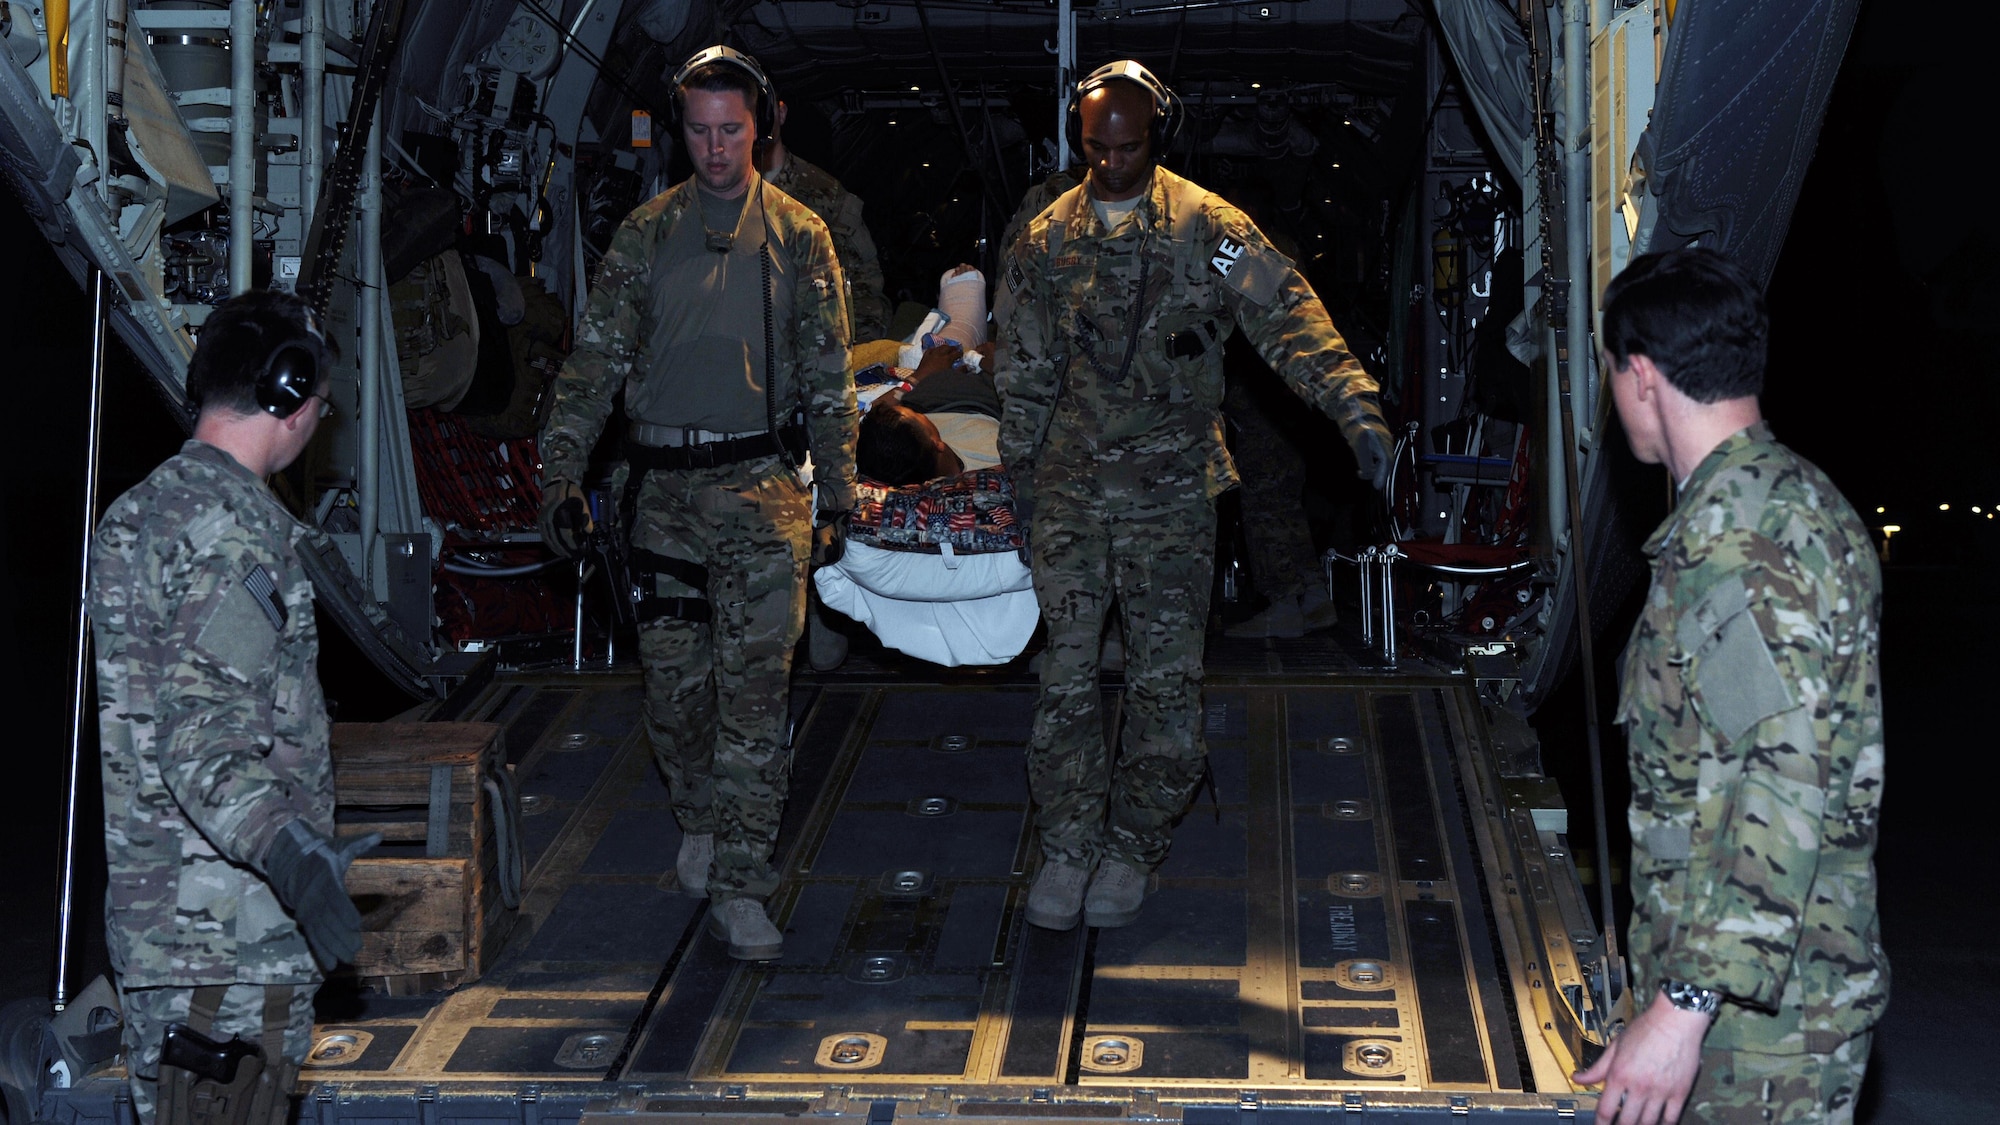 U.S. Air Force Tech. Sgt. Alexander Finn and Tech. Sgt. Johnny Busby, 455th Expeditionary Aeromedical Evacuation Squadron technicians, transport a patient from a C-130 Hercules to an ambulance in Southwest Asia, April 19, 2015. (U.S. Air Force photo by Staff Sgt. Whitney Amstutz)